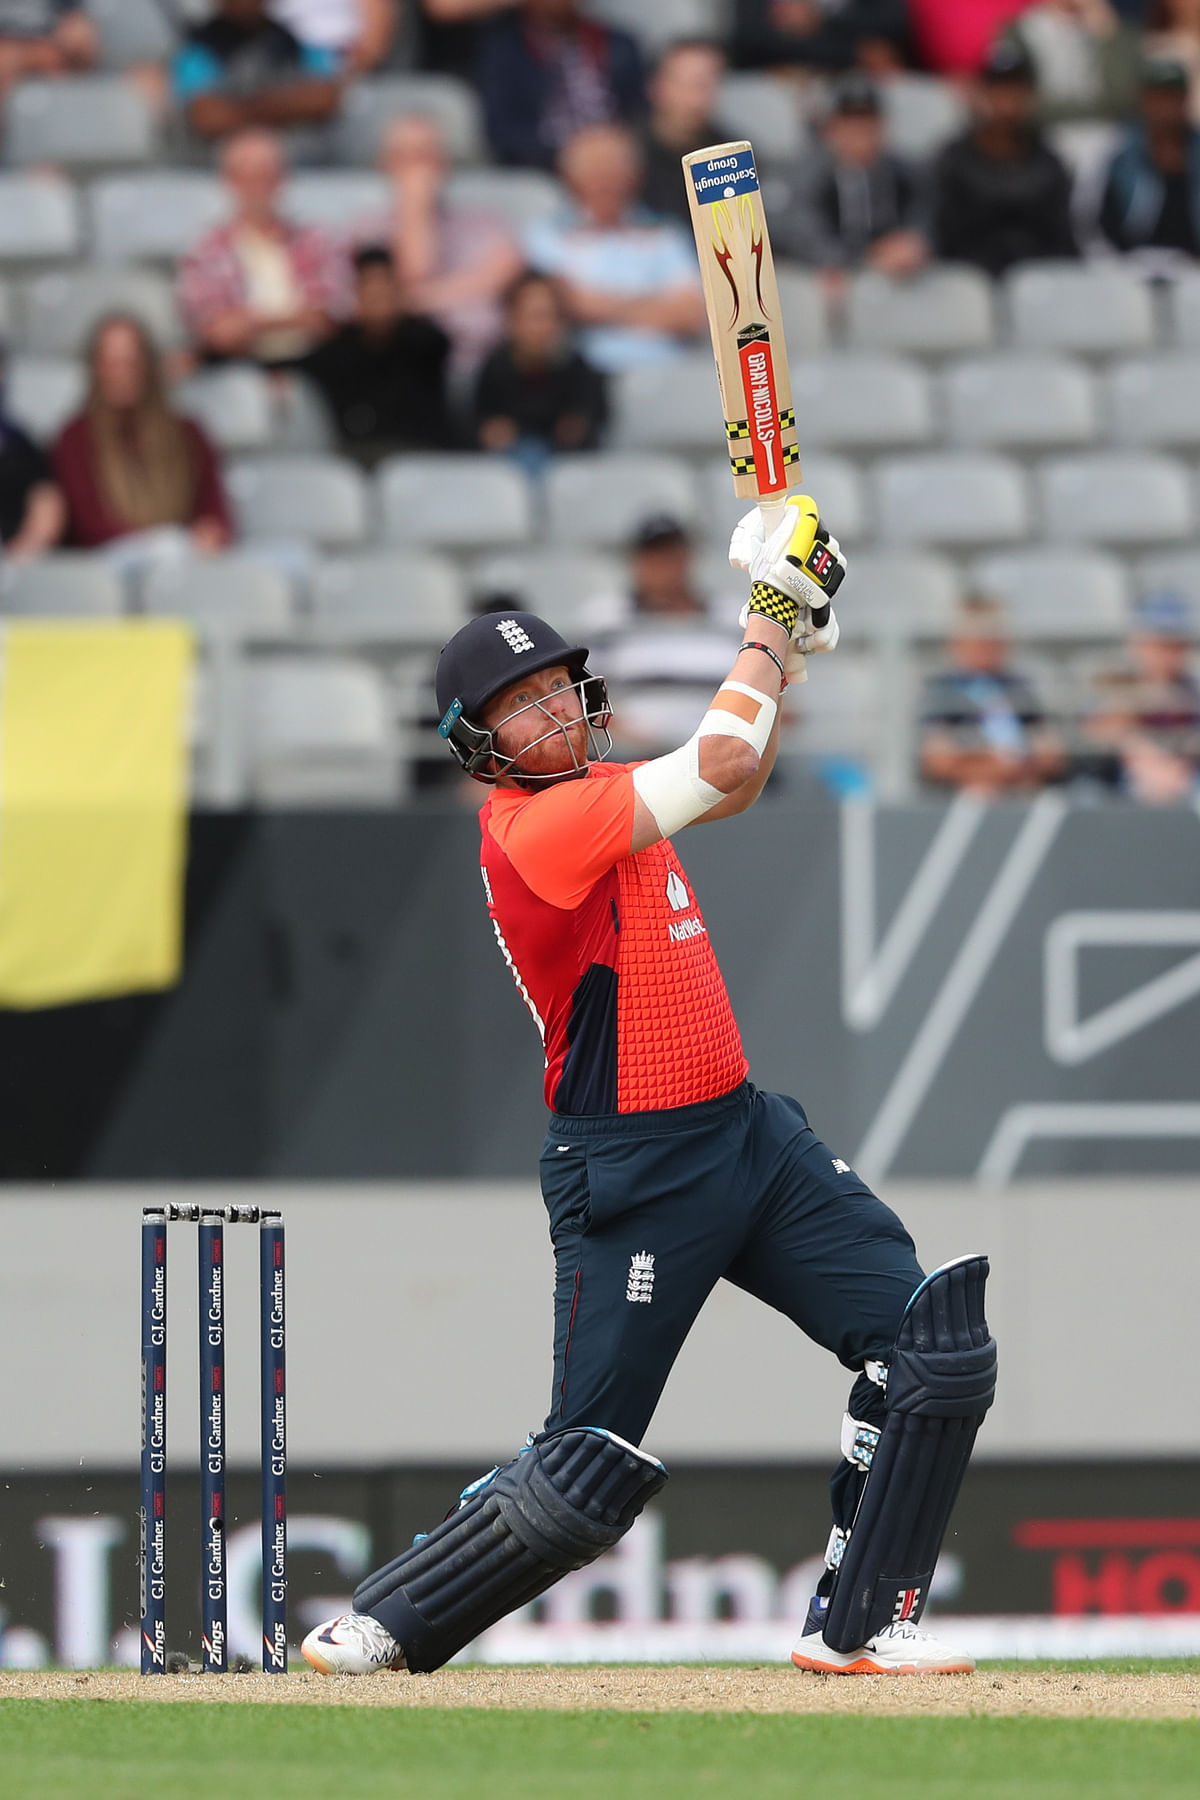 England`s Jonny Bairstow bats during the 5th Twenty20 cricket match between New Zealand and England at Eden Park in Auckland on 10 November, 2019. Photo: AFP